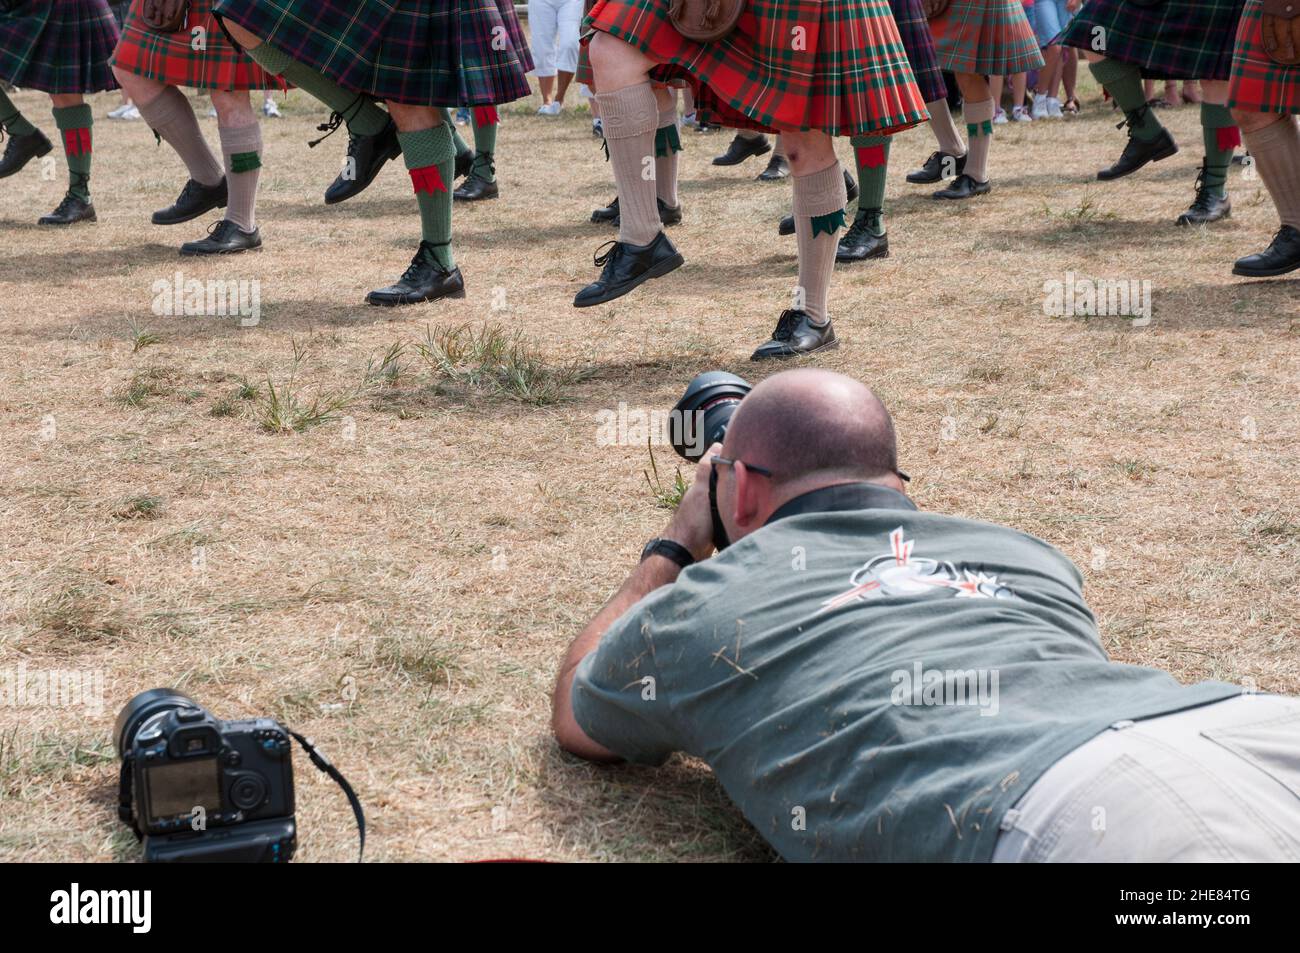 Photographer gets a low angle shot of marching bagpiper's legs  and kilt hems. Stock Photo